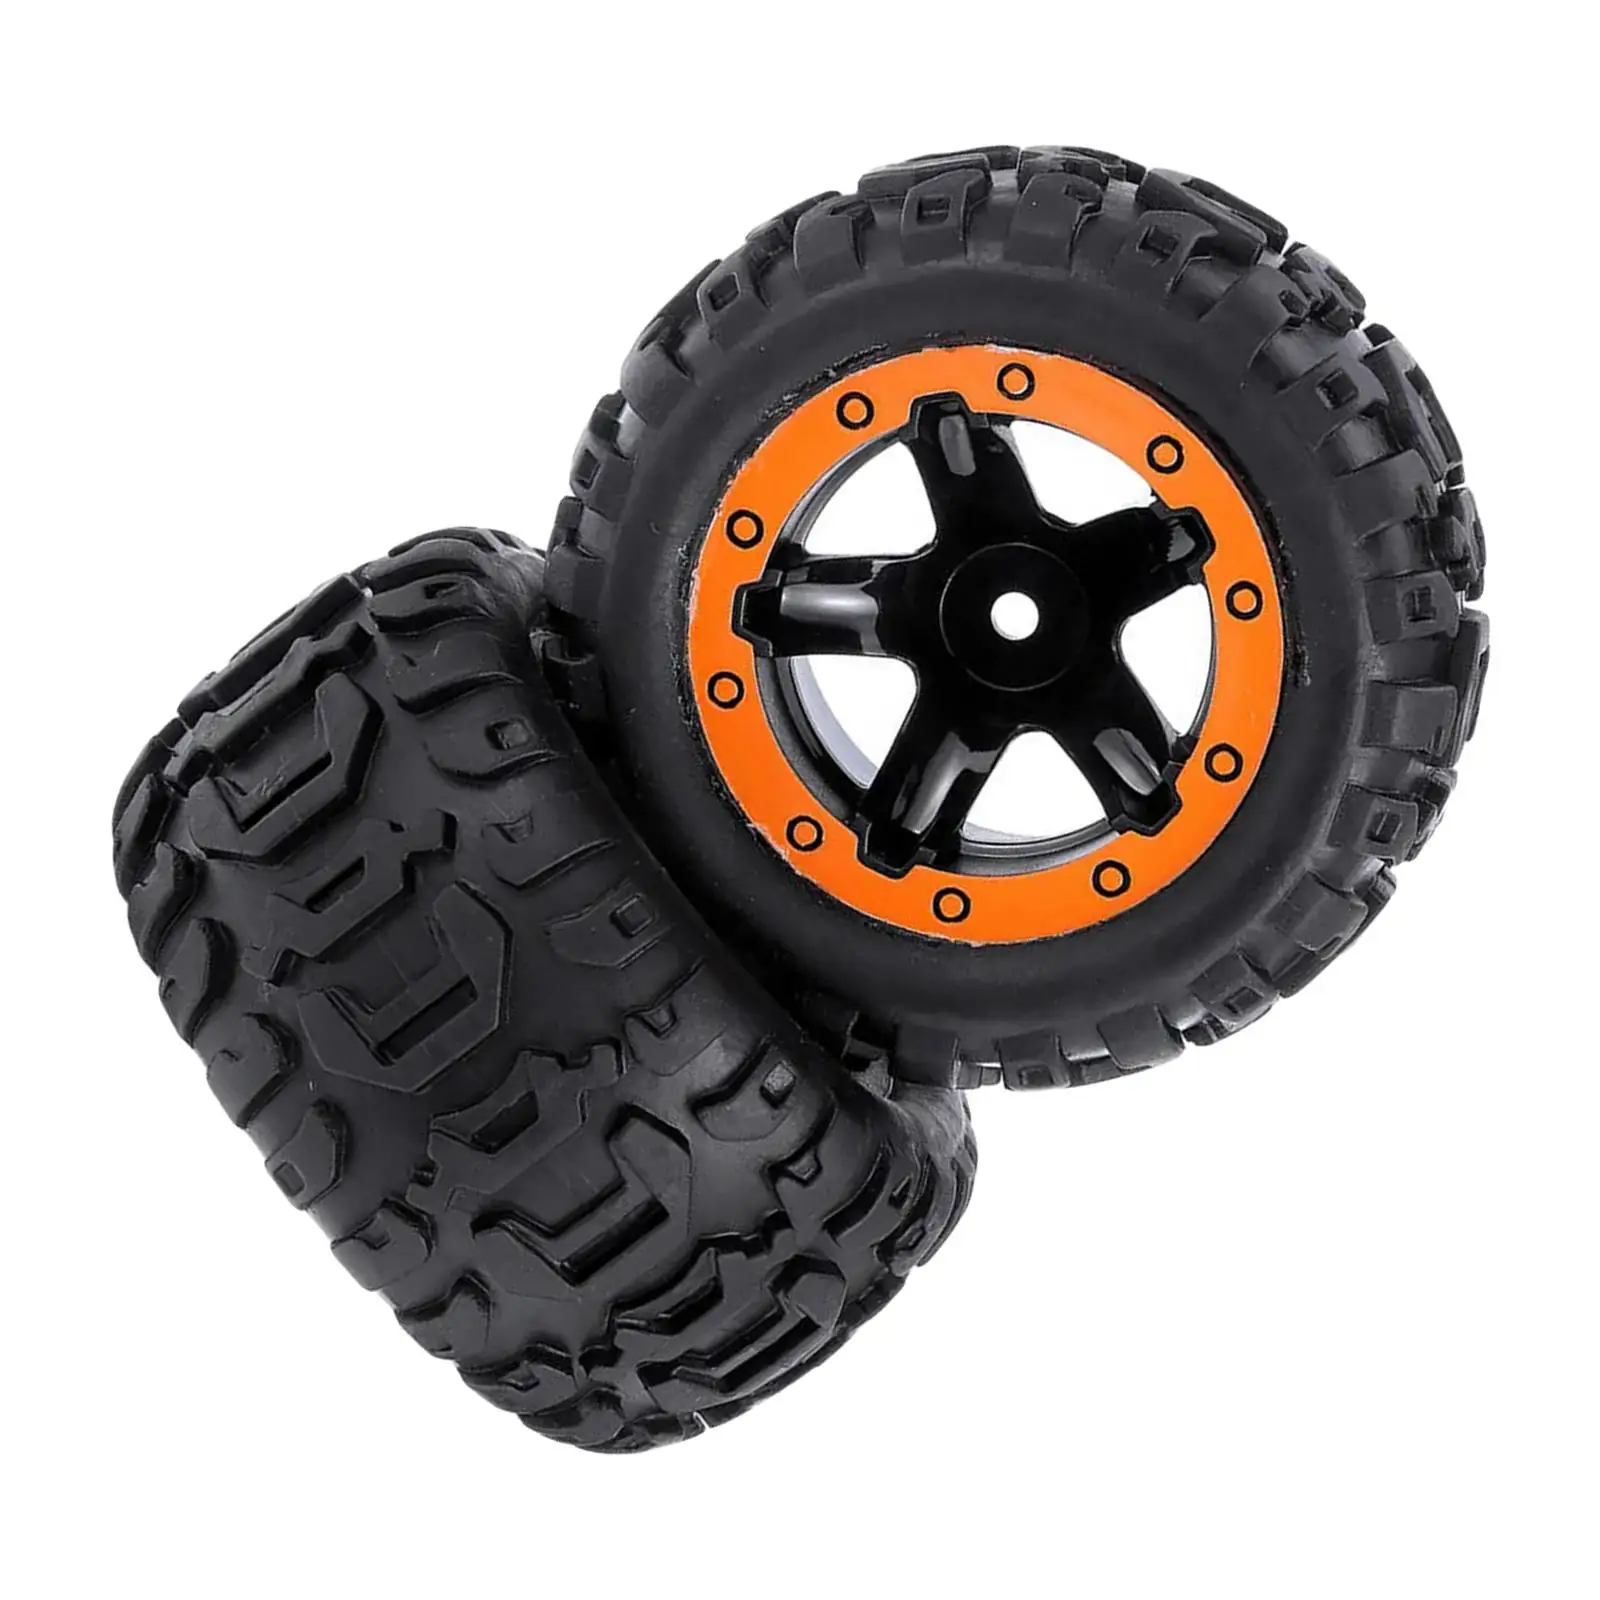 2 Pieces RC Wheels Tires Replacements for HBX 16889 Trucks RC 